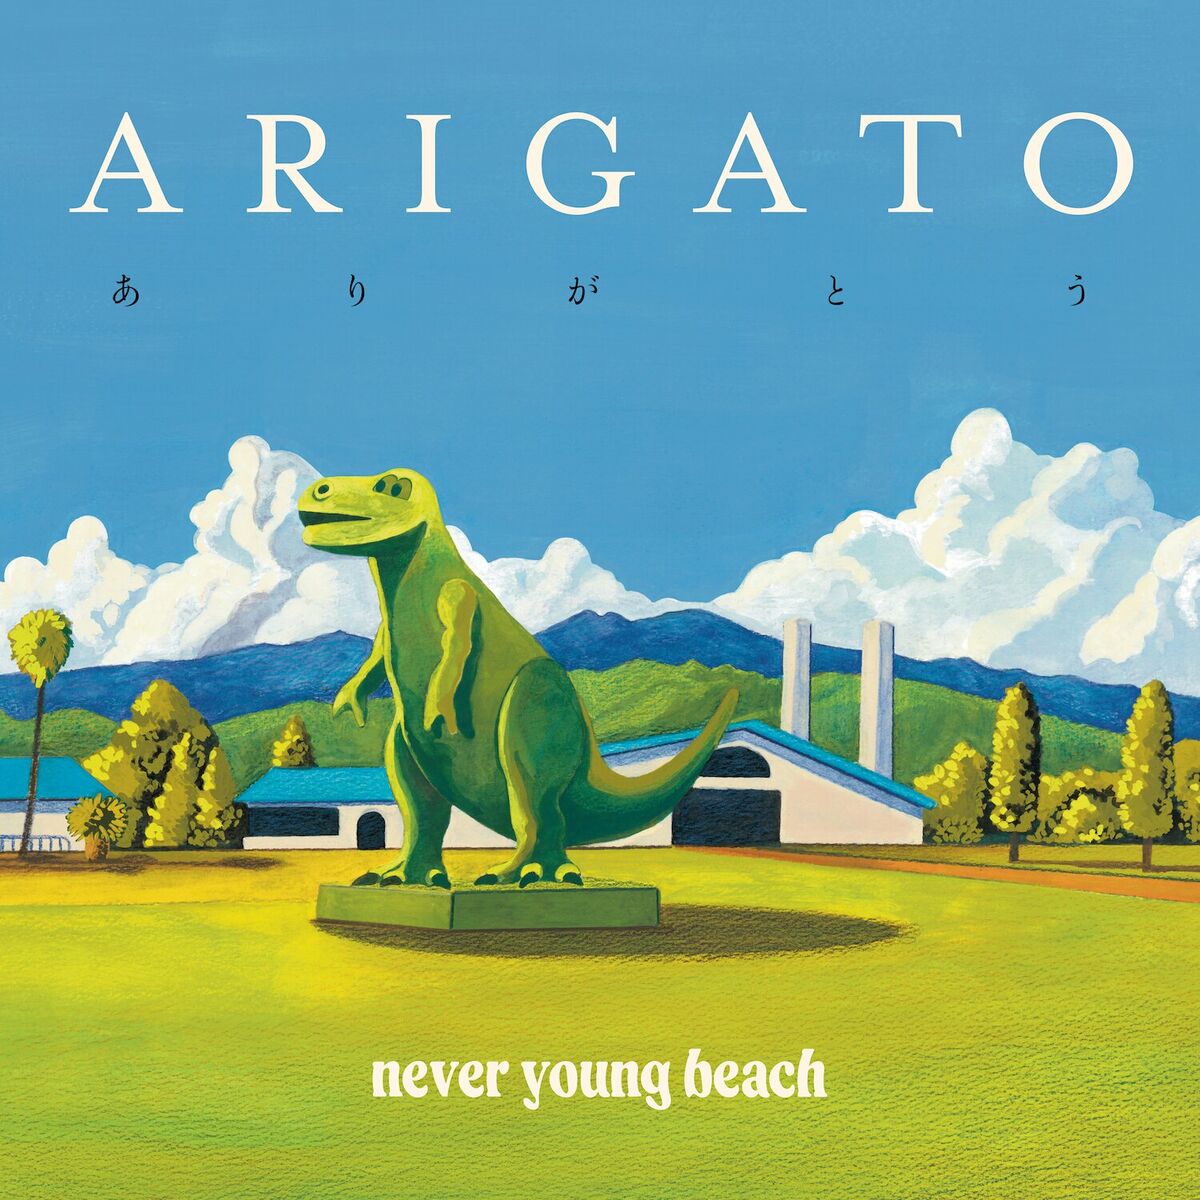 never young beach: albums, songs, playlists | Listen on Deezer